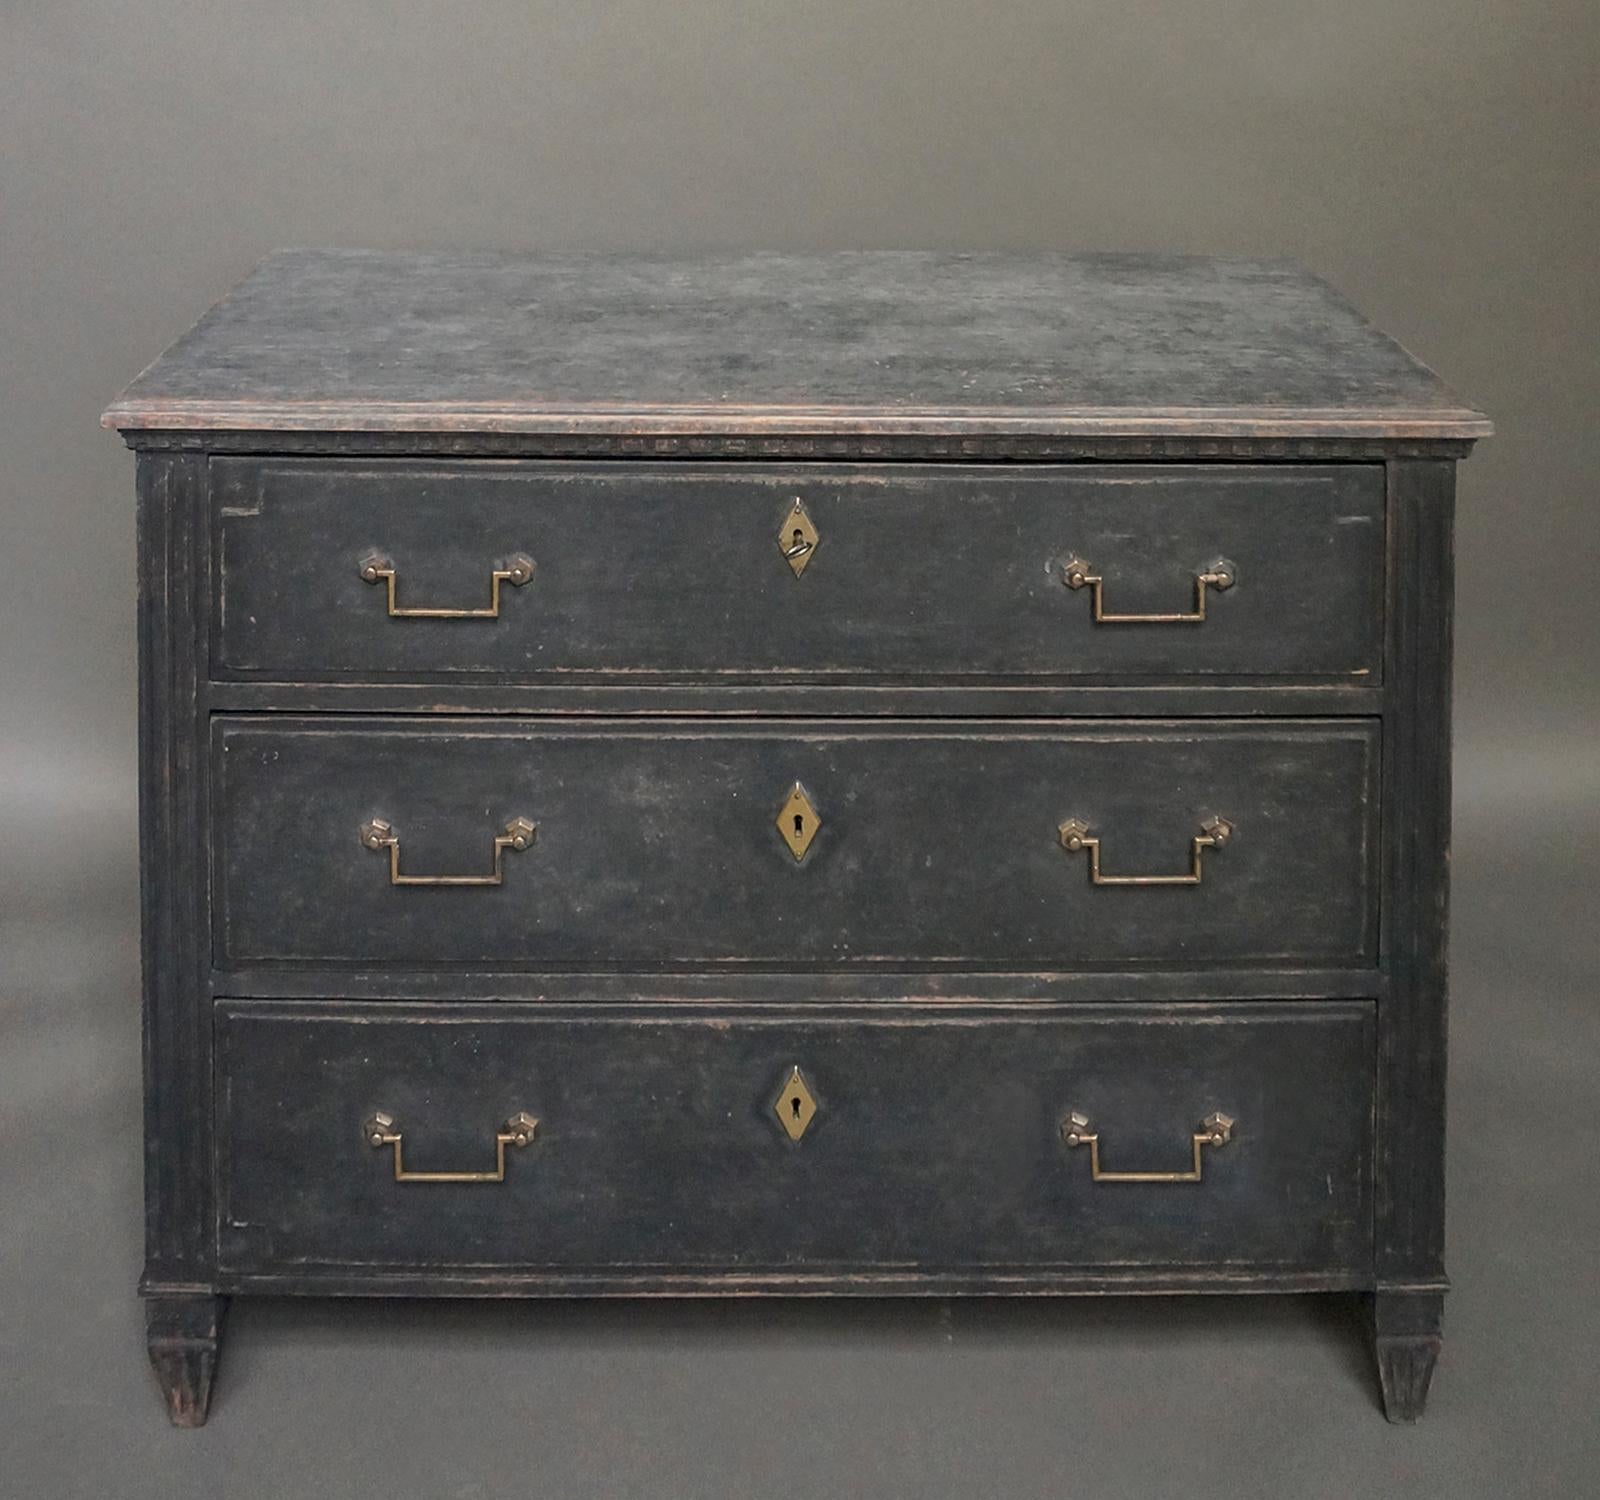 Black chest of drawers in the neoclassical style, Sweden, circa 1860. Shaped top with dentil molding and reeded corner posts above the tapering square feet. Nicely detailed raised panels on the drawer fronts. Original hardware.